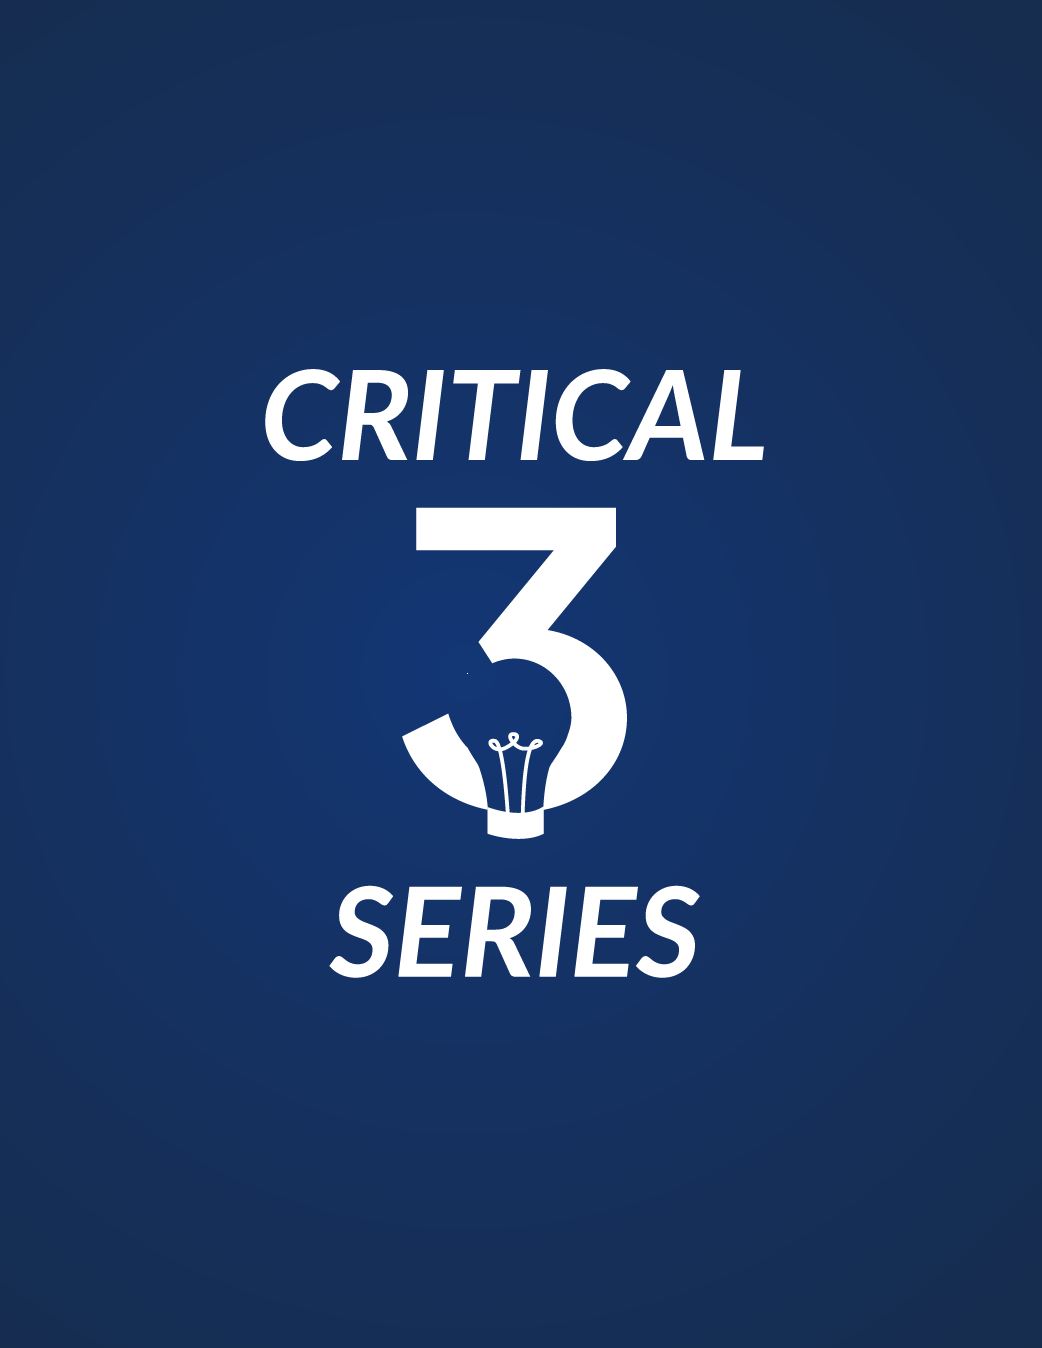 *Critical 3: Missing At Risk Response Strategies in the First 30 Minutes: The Initial Neighborhood Canvass Tool